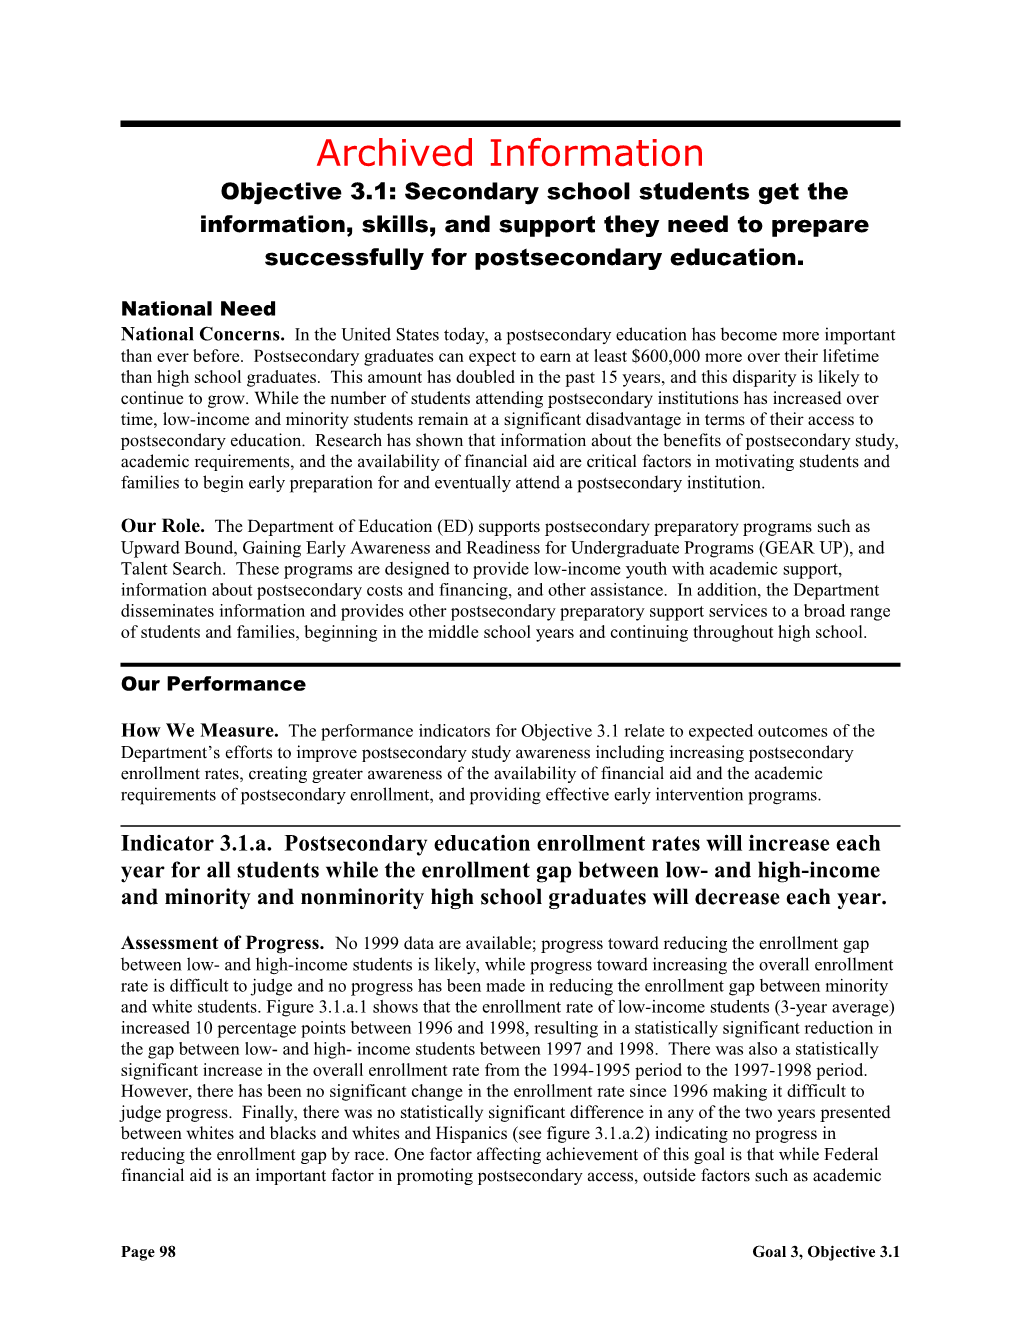 Archived: Objective 3.1: Secondary School Student Get the Information, Skills, and Support